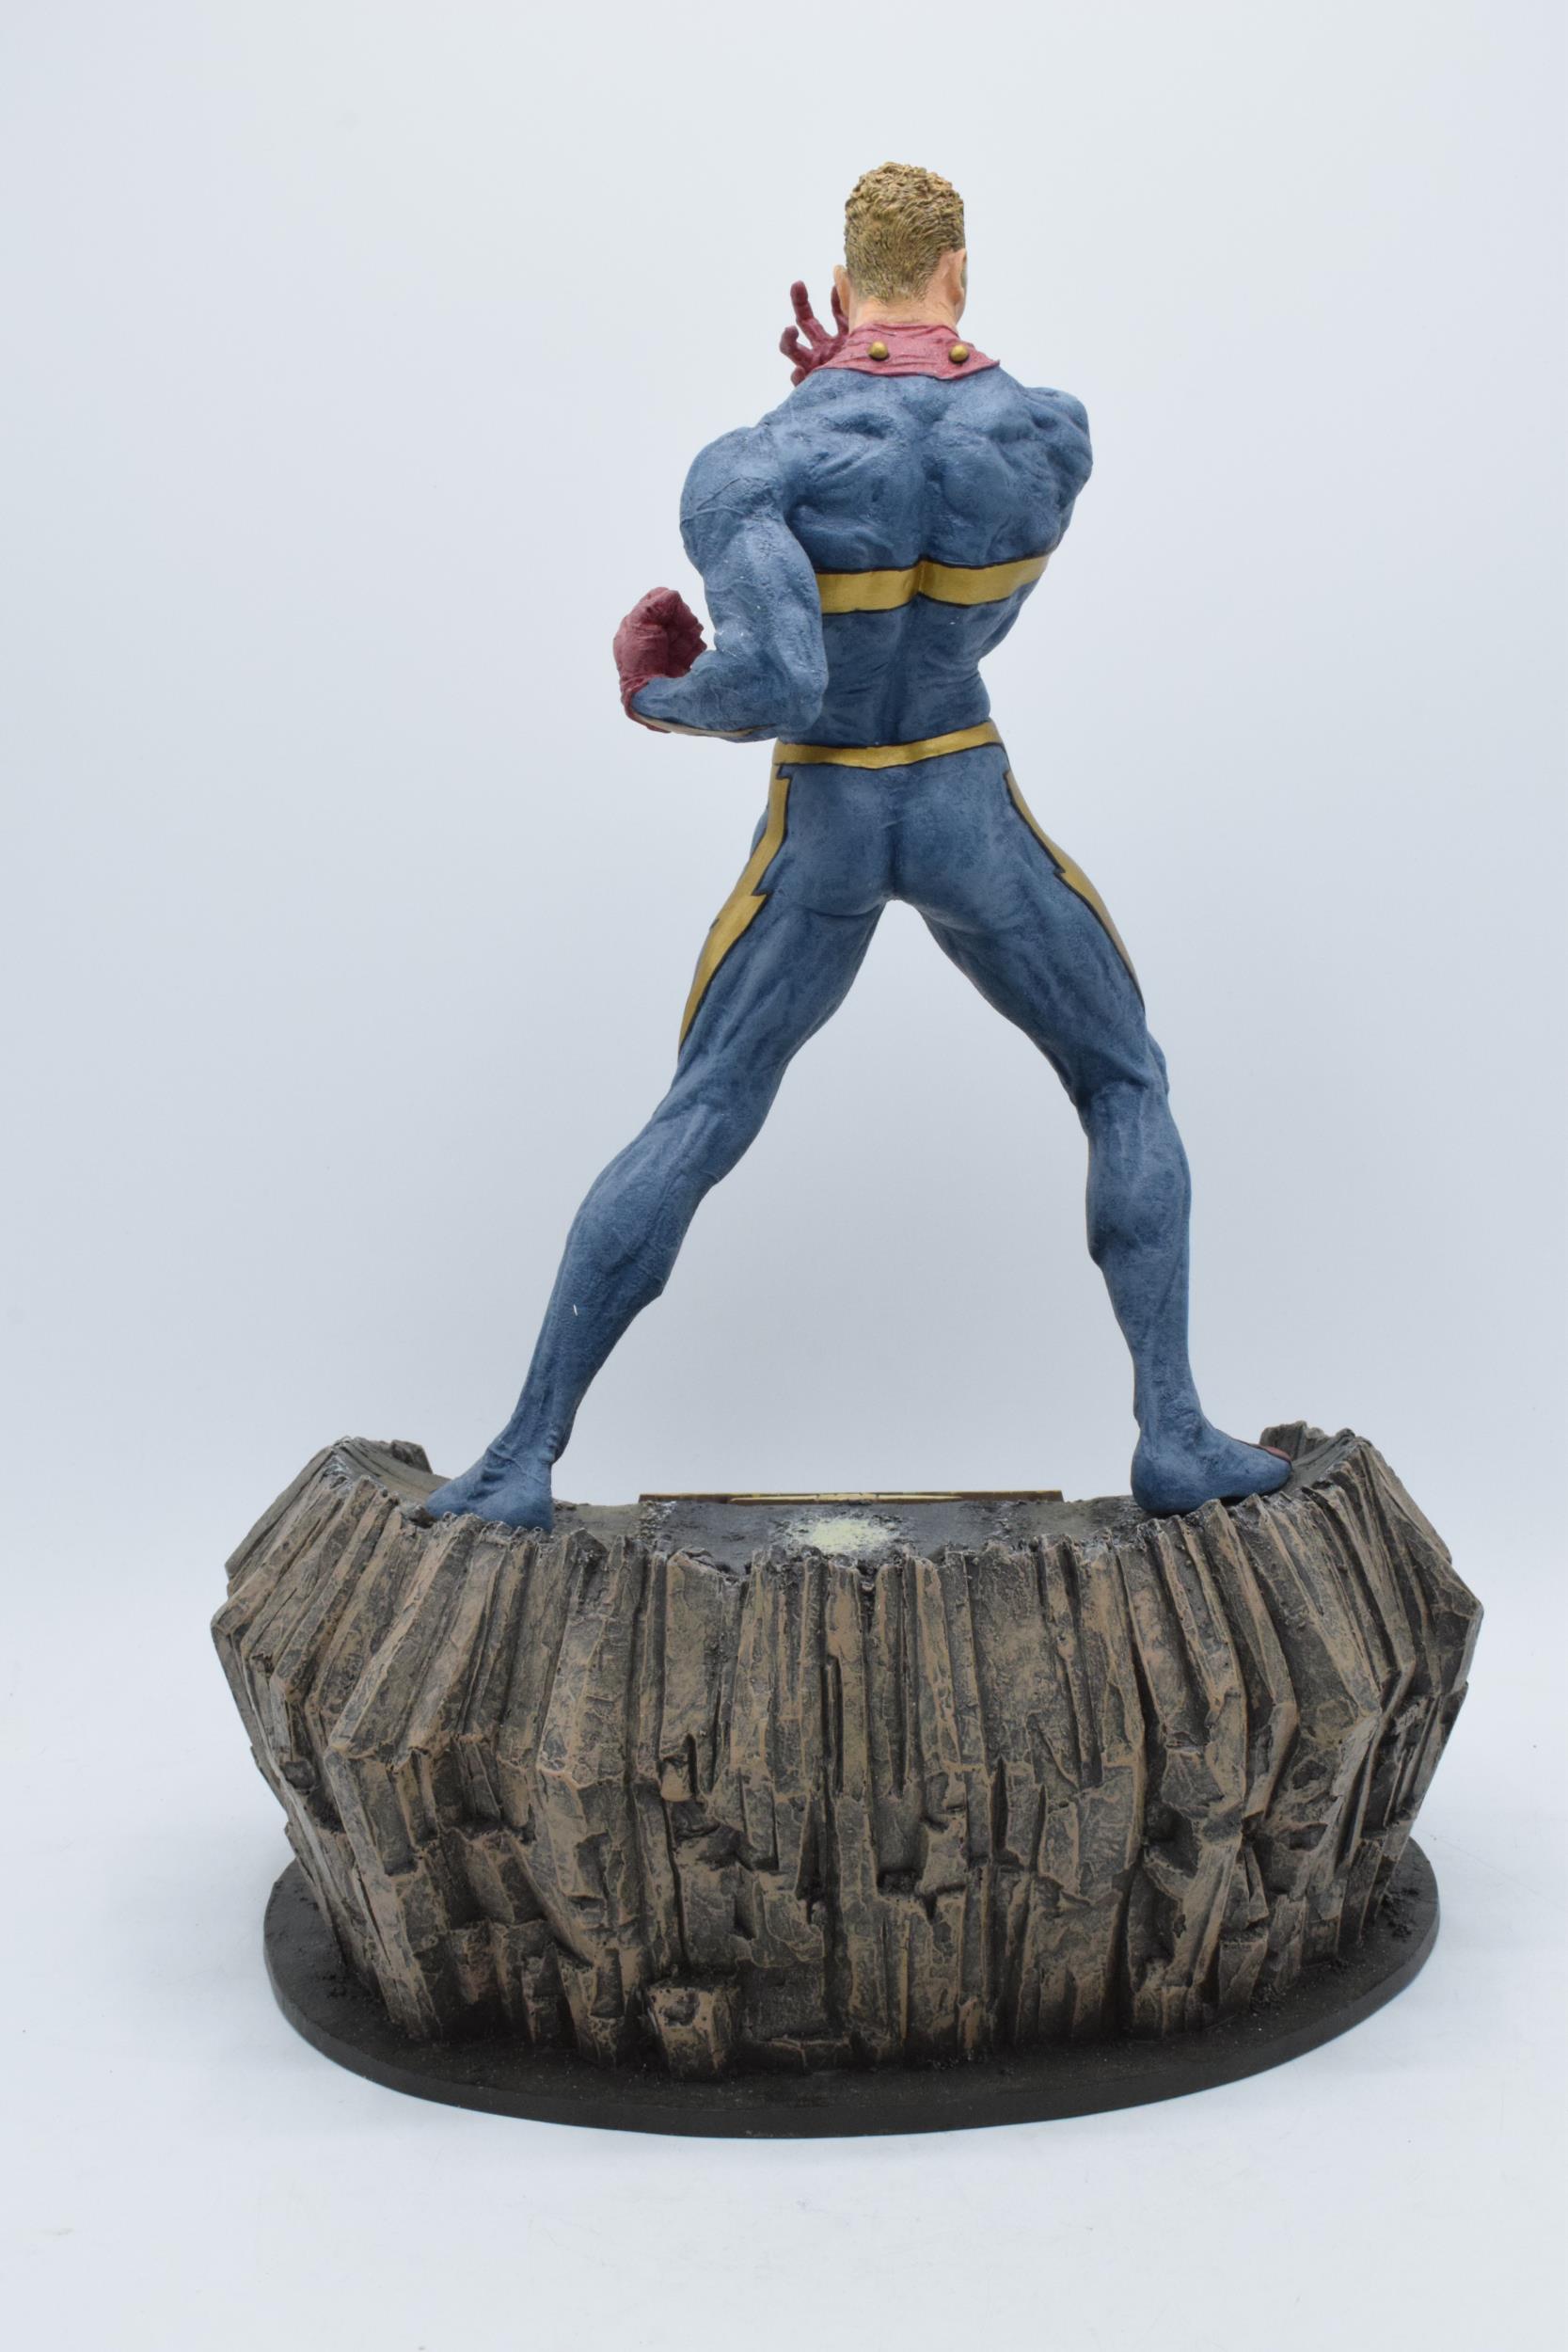 Boxed Miracleman Extremely Limited Edition Cold Cast Resin figure, 38cm tall. - Image 6 of 6